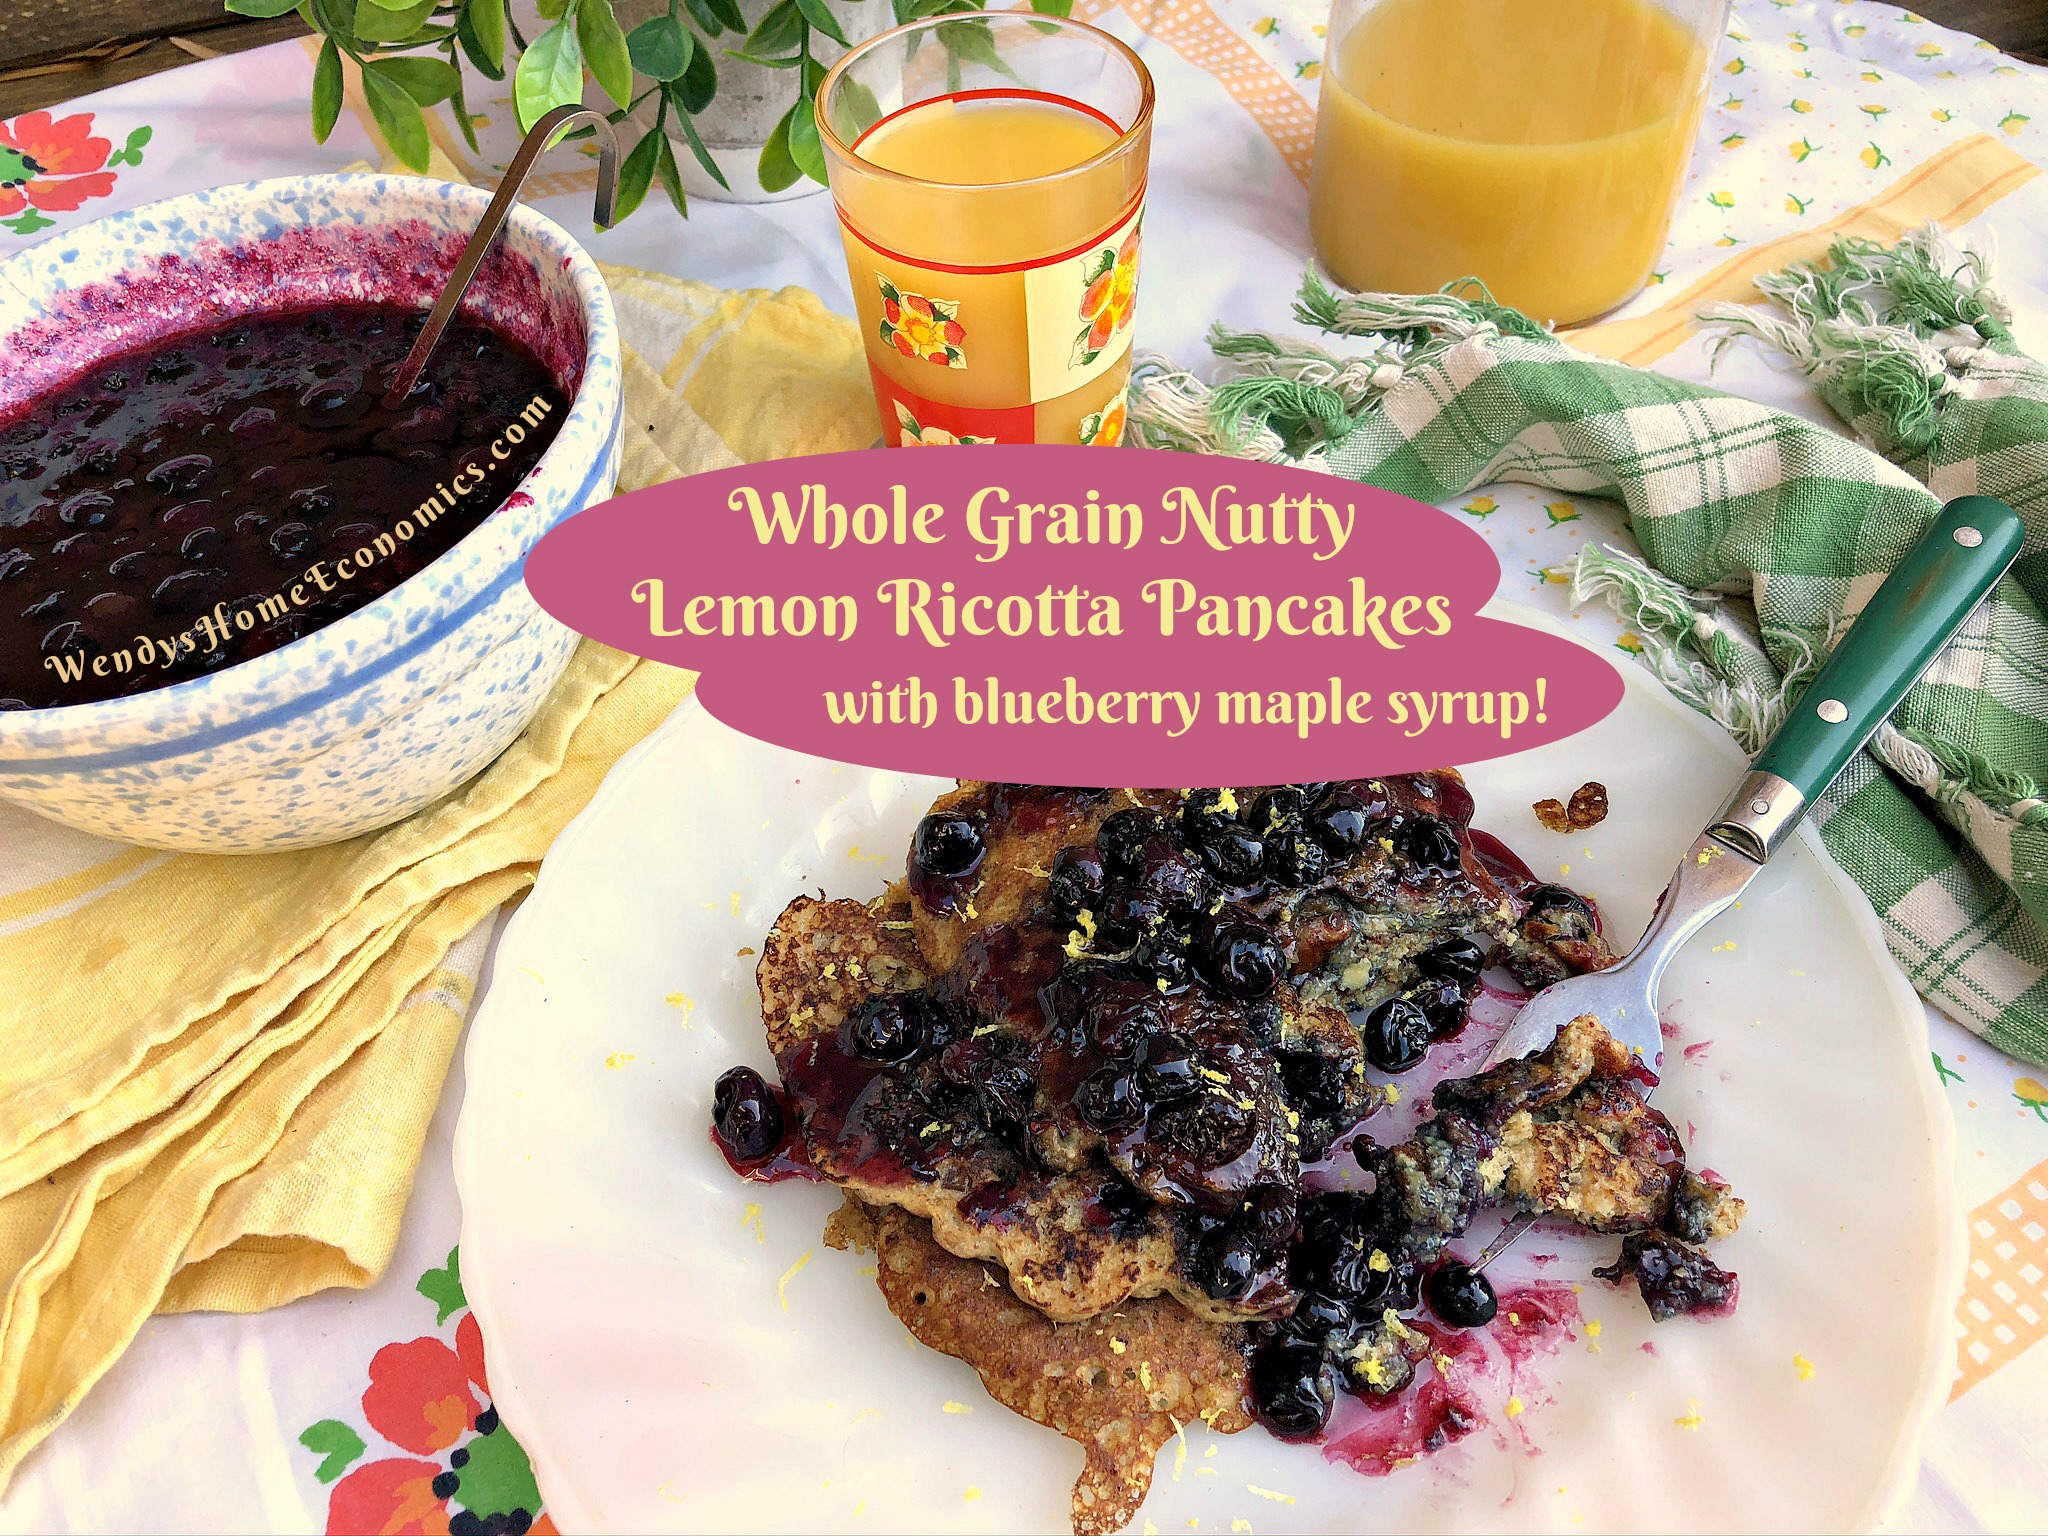 Whole Grain Nutty Lemon Ricotta Pancakes with blueberry maple syrup